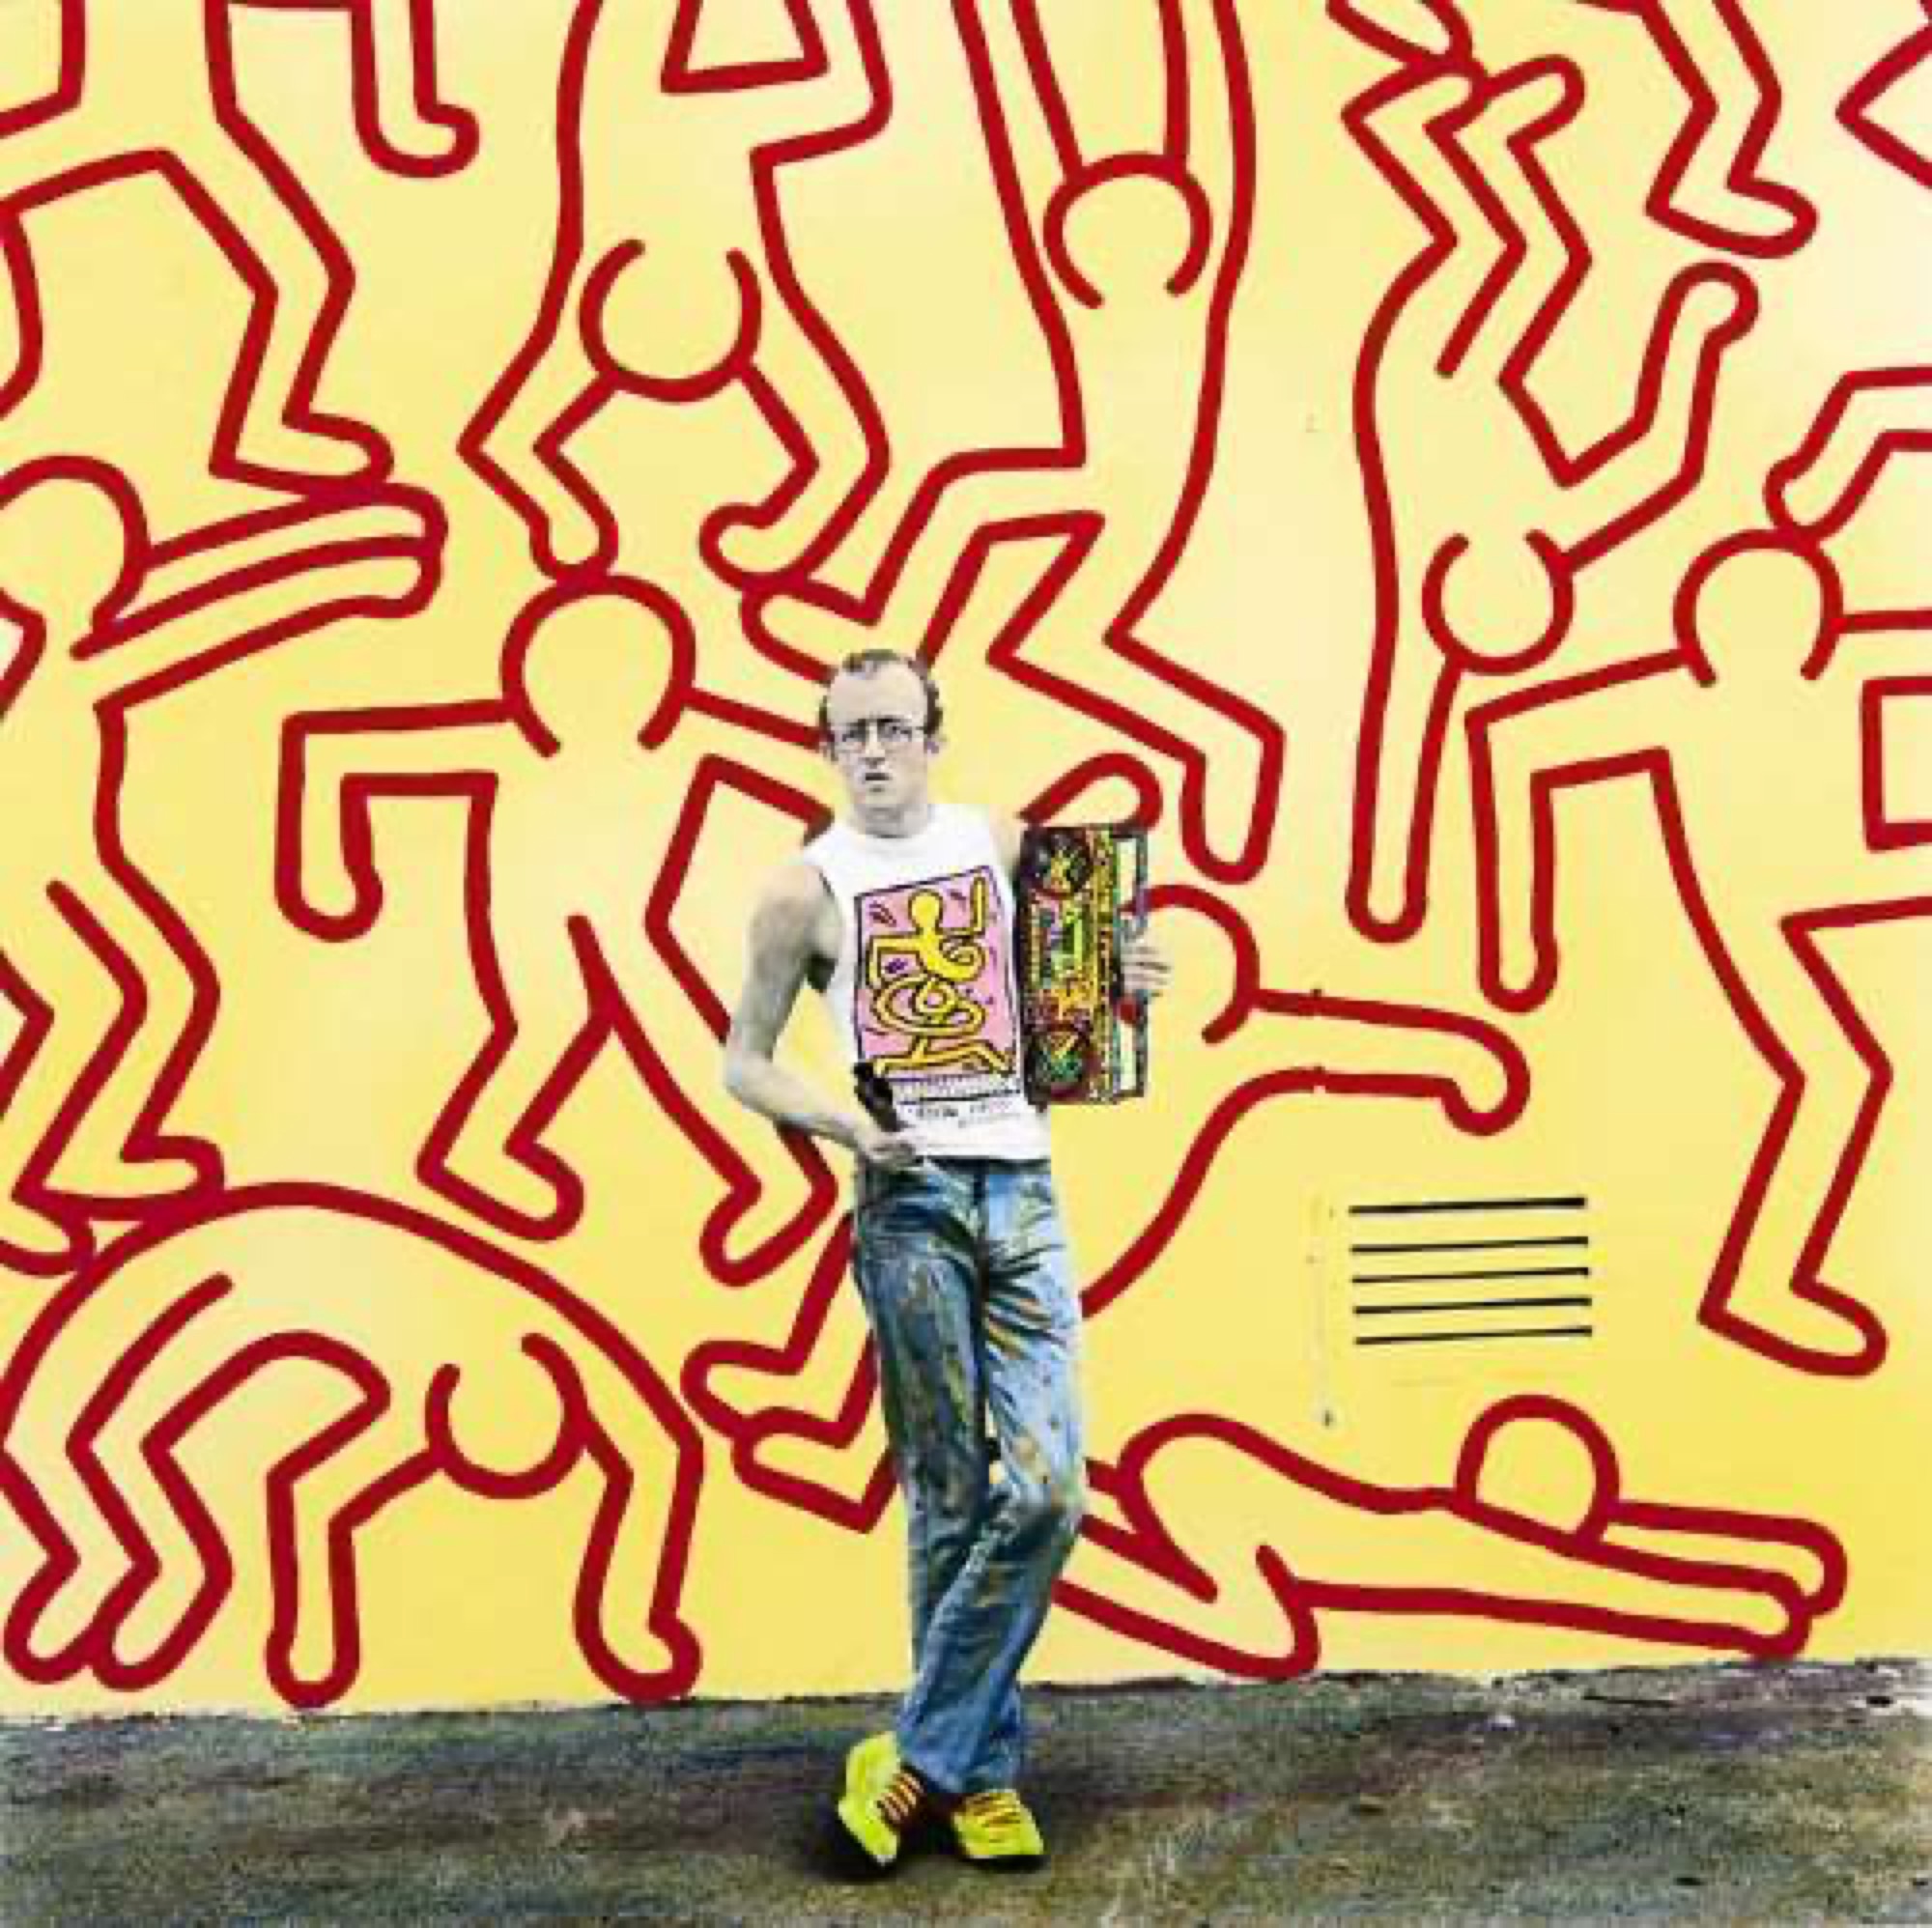 Ruth Maddison, <em>Keith Haring</em>, 1985/2014, pigment print from scanned negative, hand-coloured and digitally enhanced, 40 x 40cm. Courtesy of the artist and the Centre for Contemporary Photography.